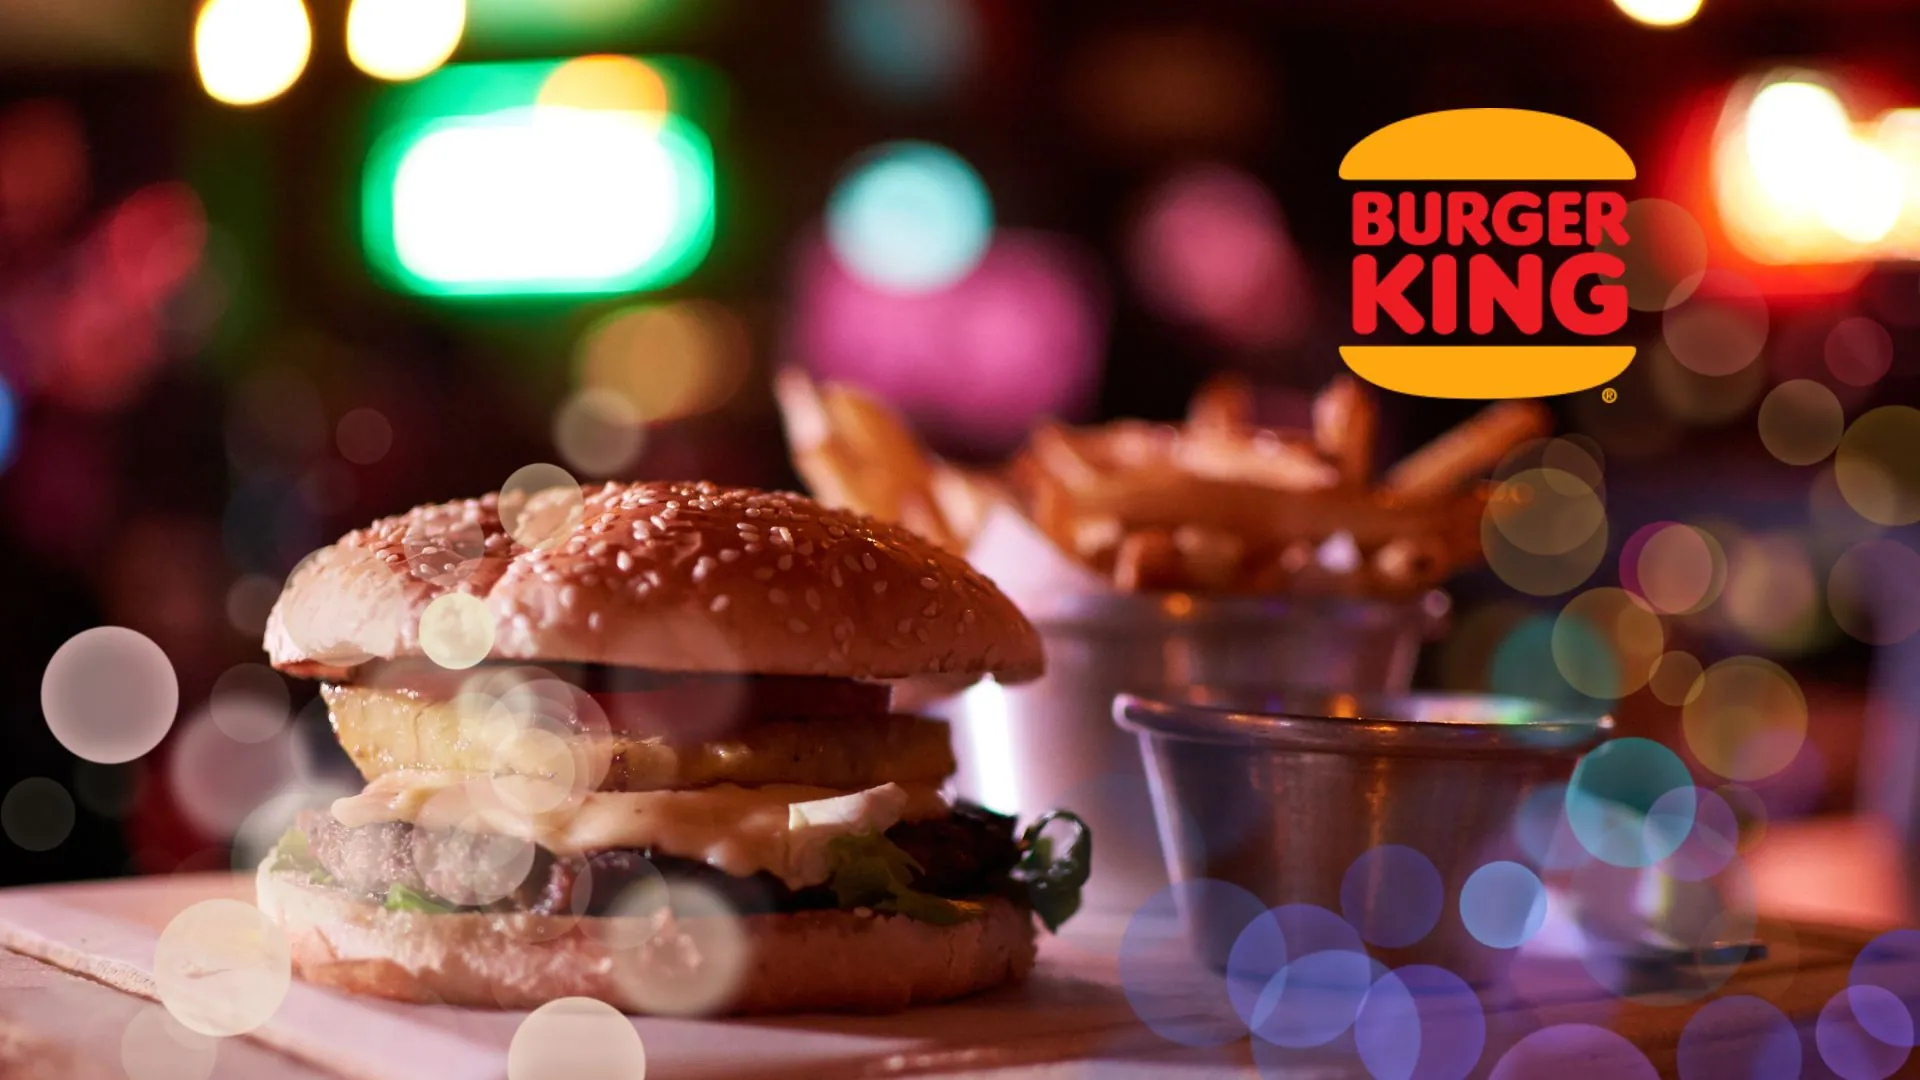 See Which VIP Card Can Offers You Free Burger King For Life